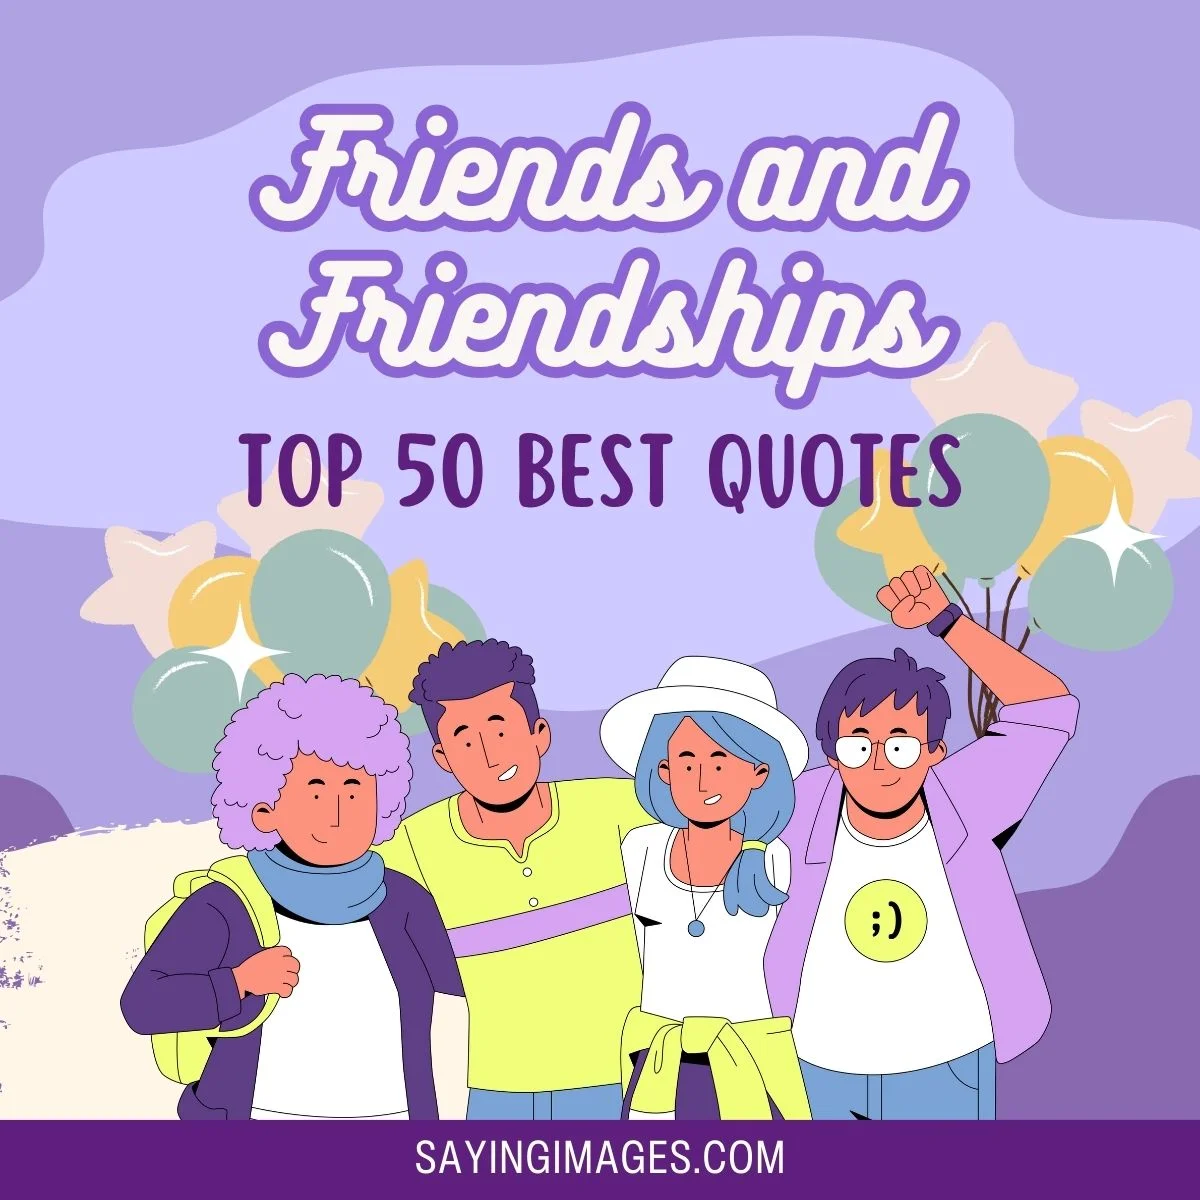 Quotes About Friends & Friendship